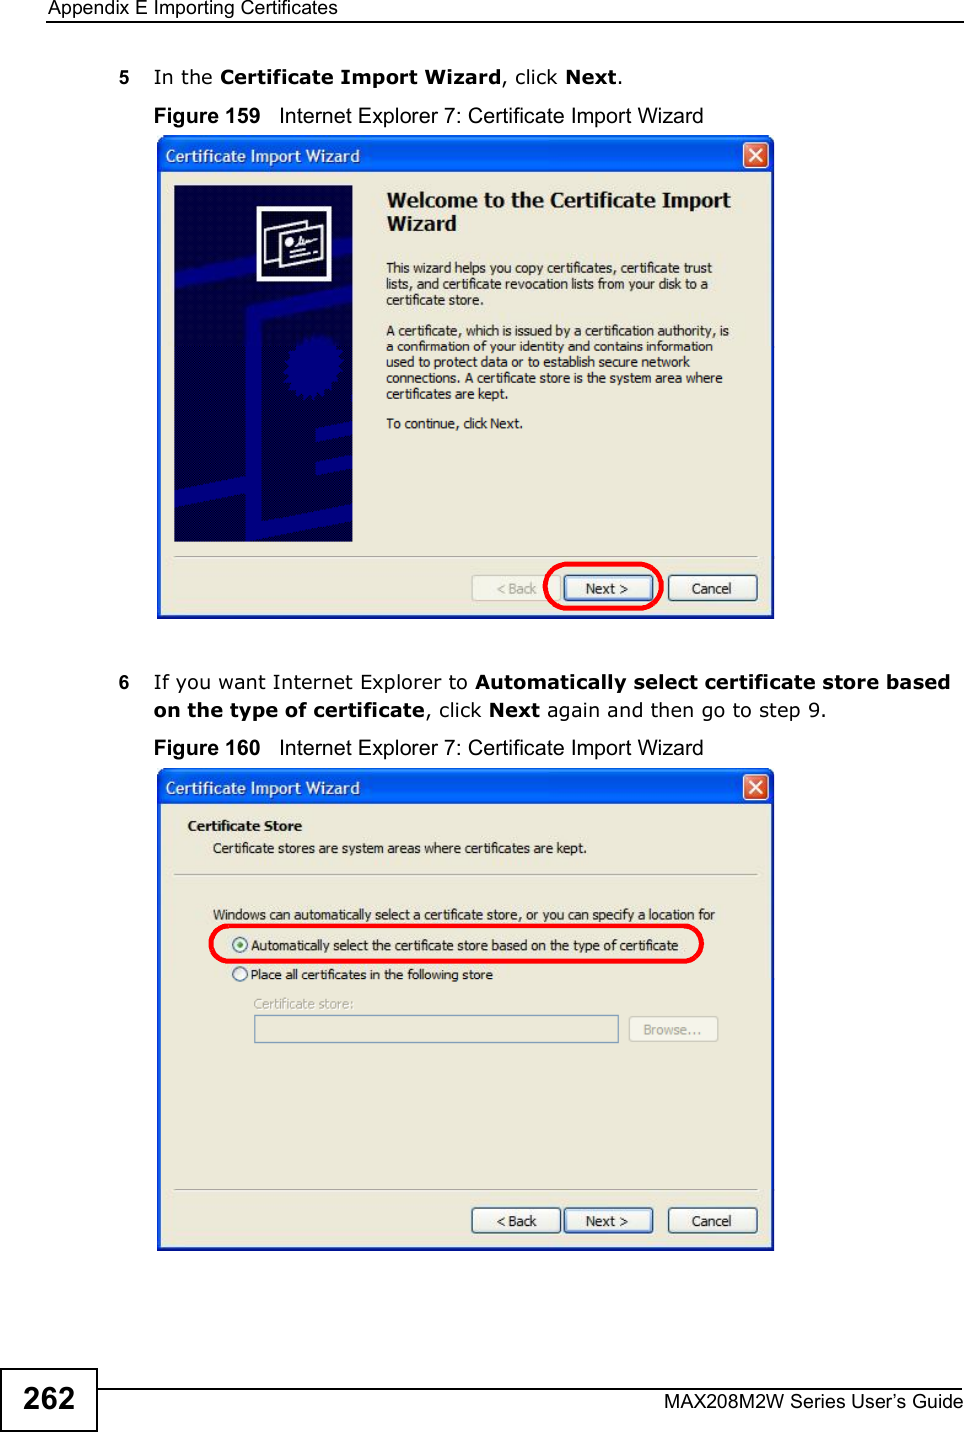 Appendix EImporting CertificatesMAX208M2W Series User s Guide2625In the Certificate Import Wizard, click Next.Figure 159   Internet Explorer 7: Certificate Import Wizard6If you want Internet Explorer to Automatically select certificate store based on the type of certificate, click Next again and then go to step 9.Figure 160   Internet Explorer 7: Certificate Import Wizard